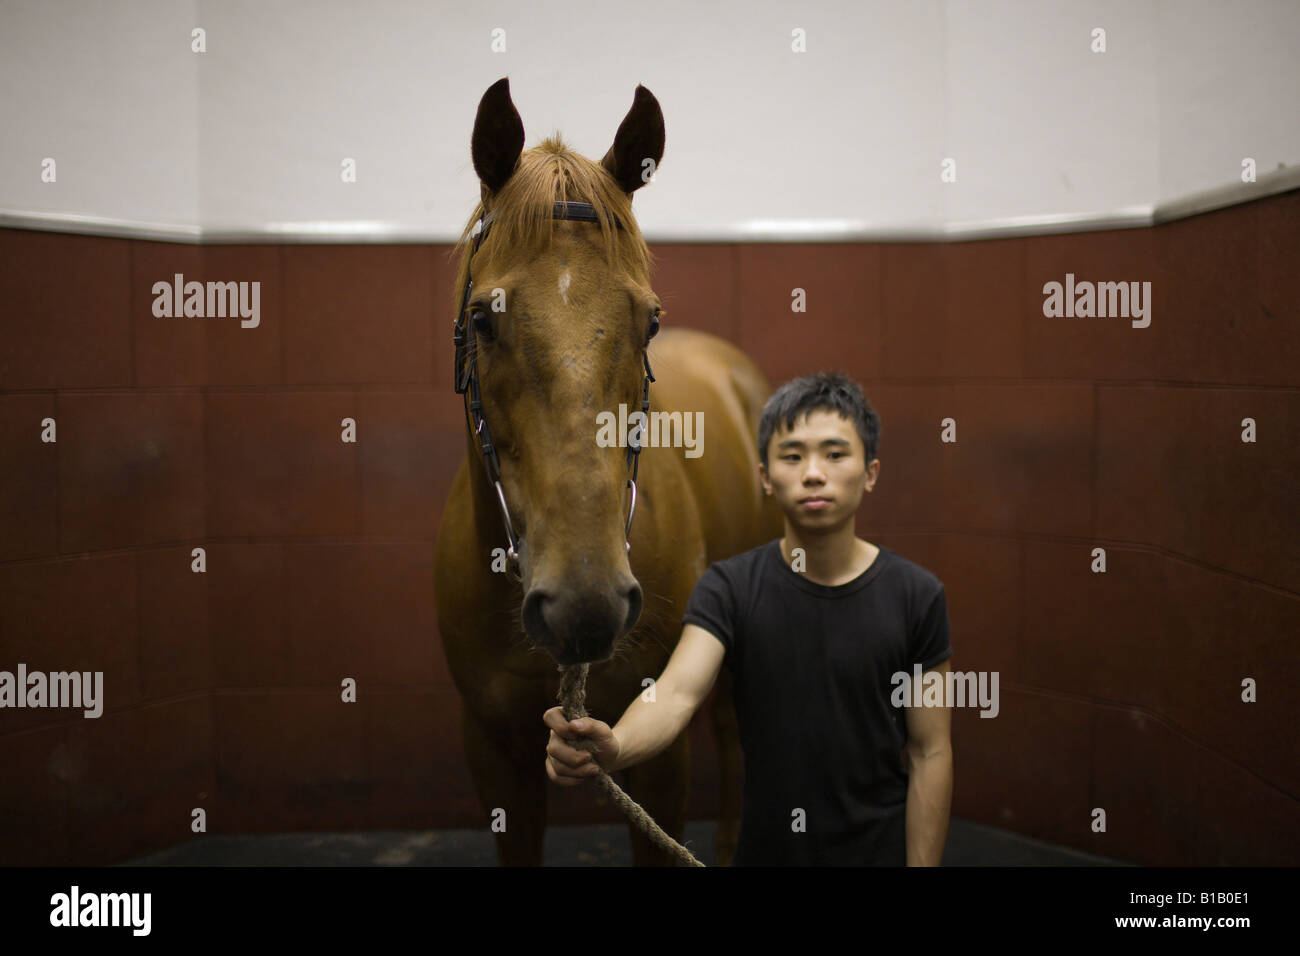 Apprentice jockey David Mo waits with a horse inside a stable before an acupuncture therapy session at the Sha Tin Racecourse Stock Photo